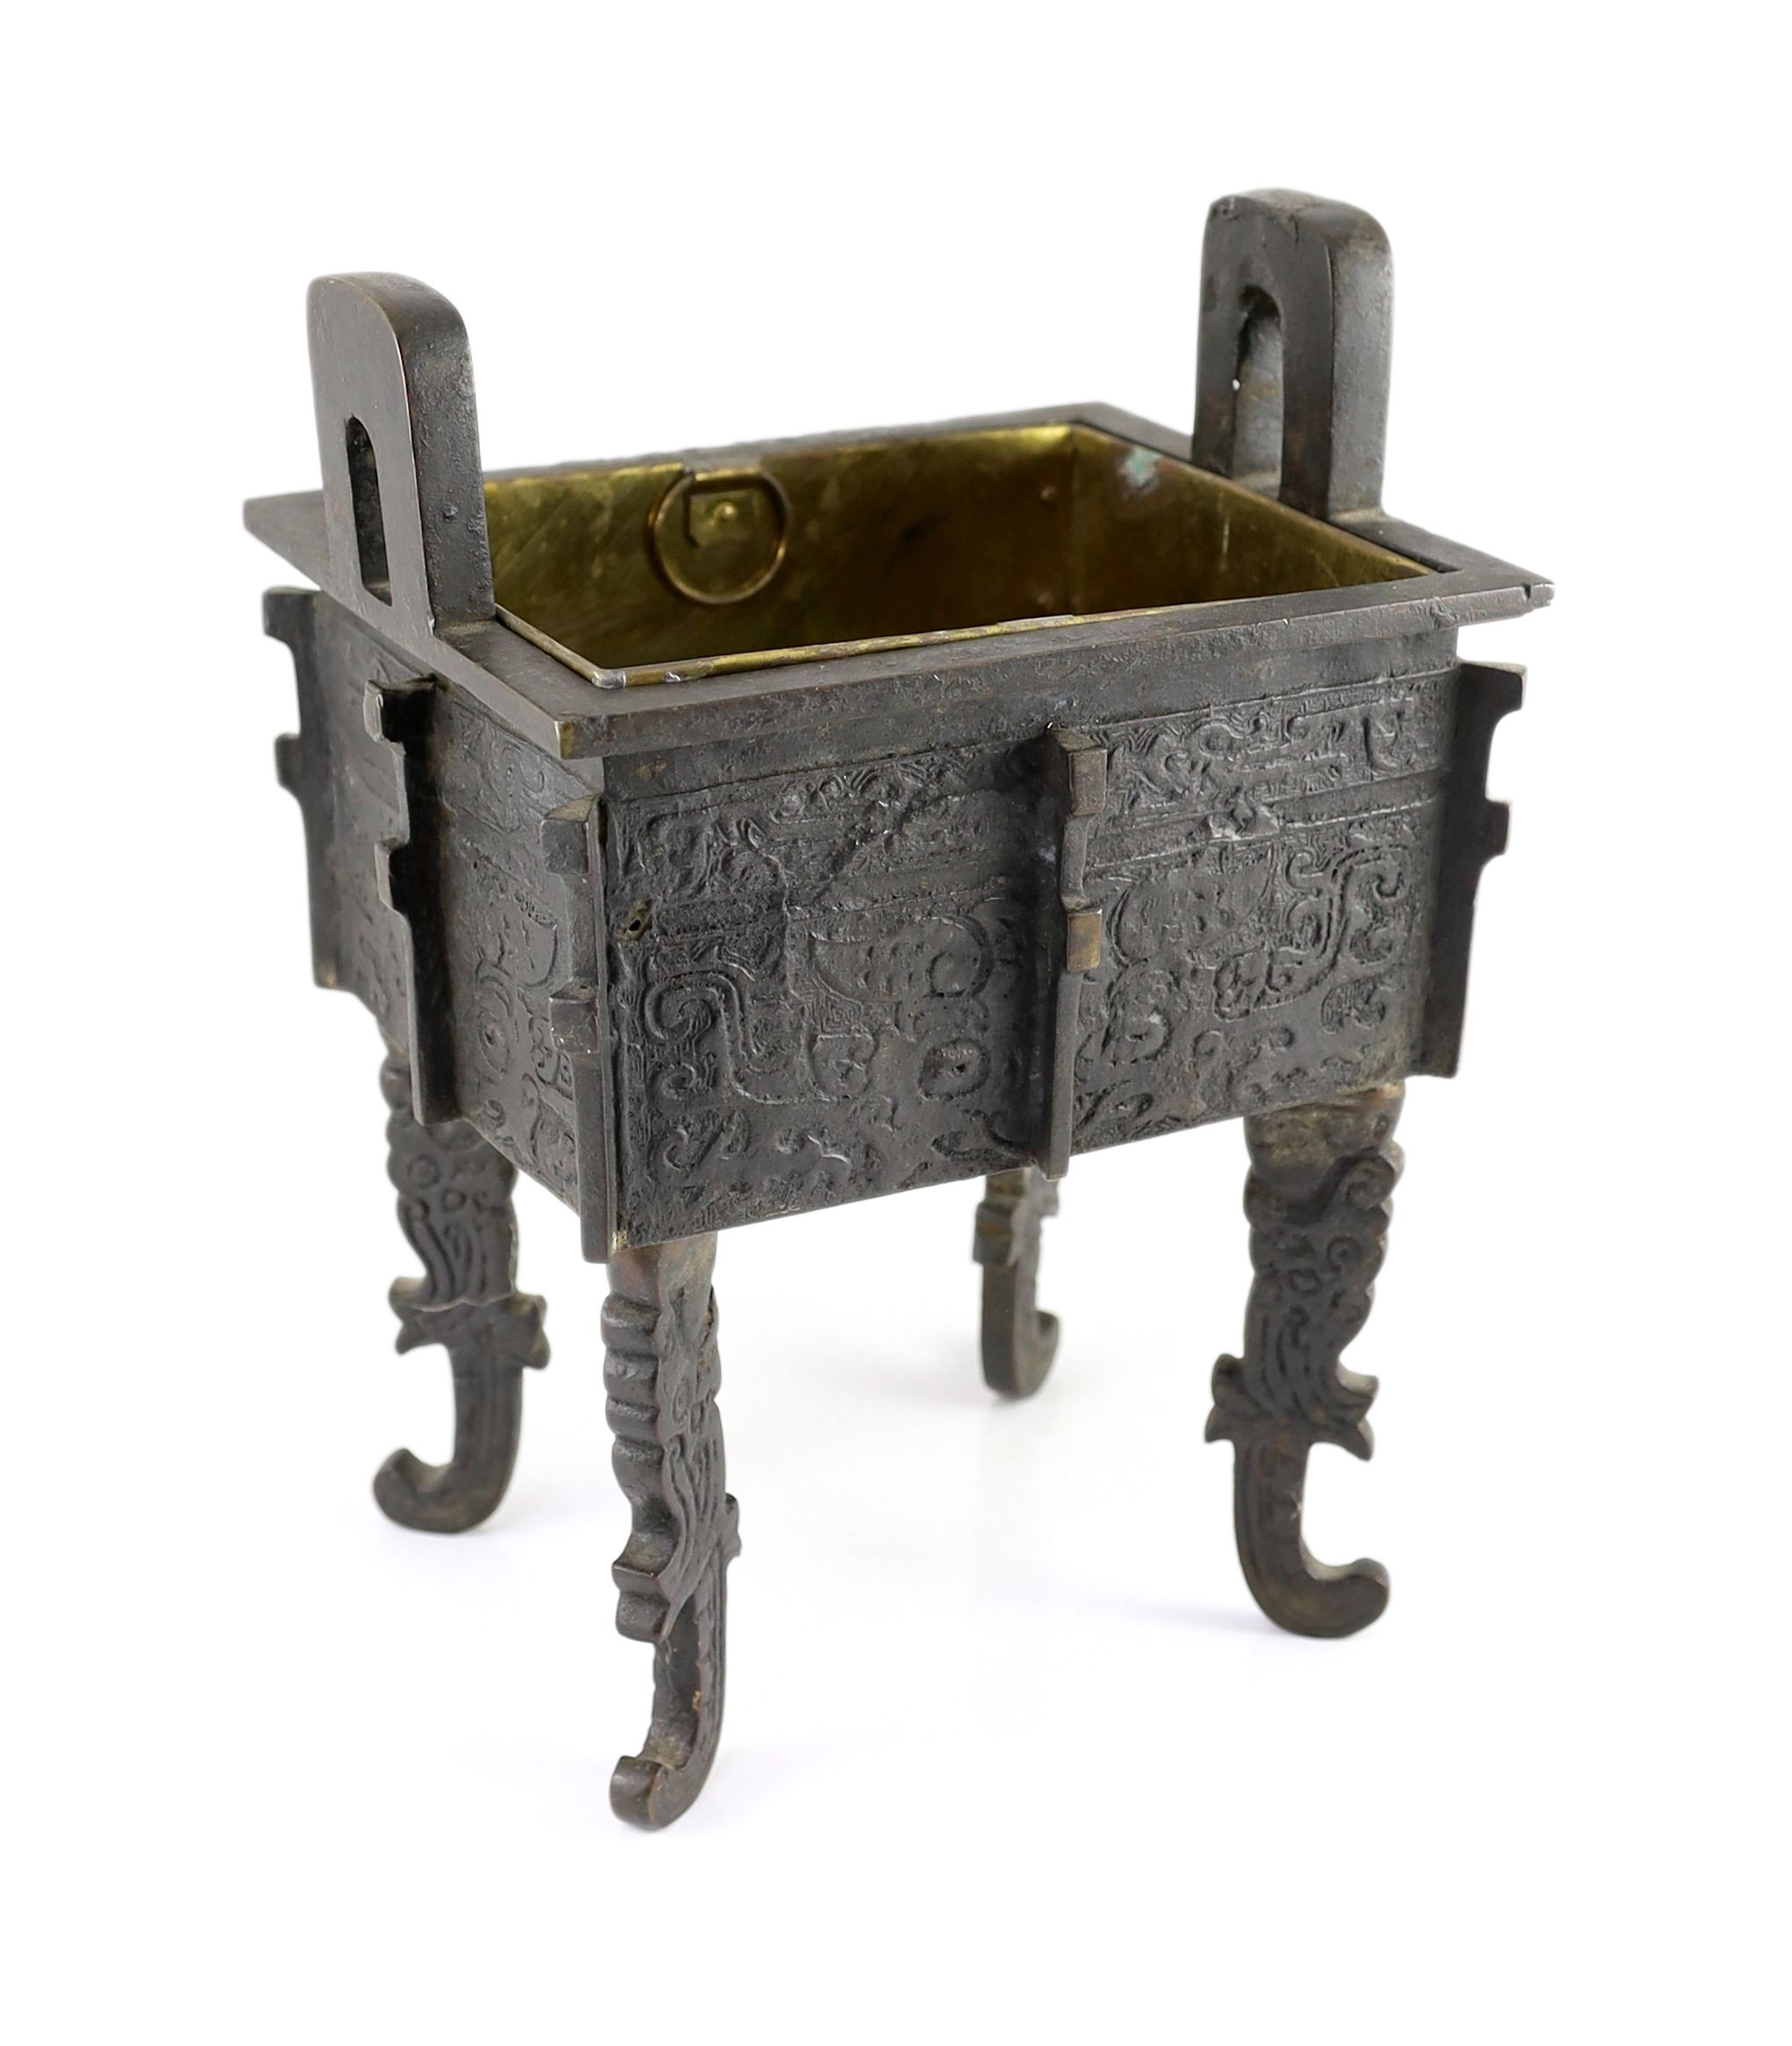 A Chinese archaistic bronze rectangular censer, fangding, 17th/18th centurydecorated in low relief